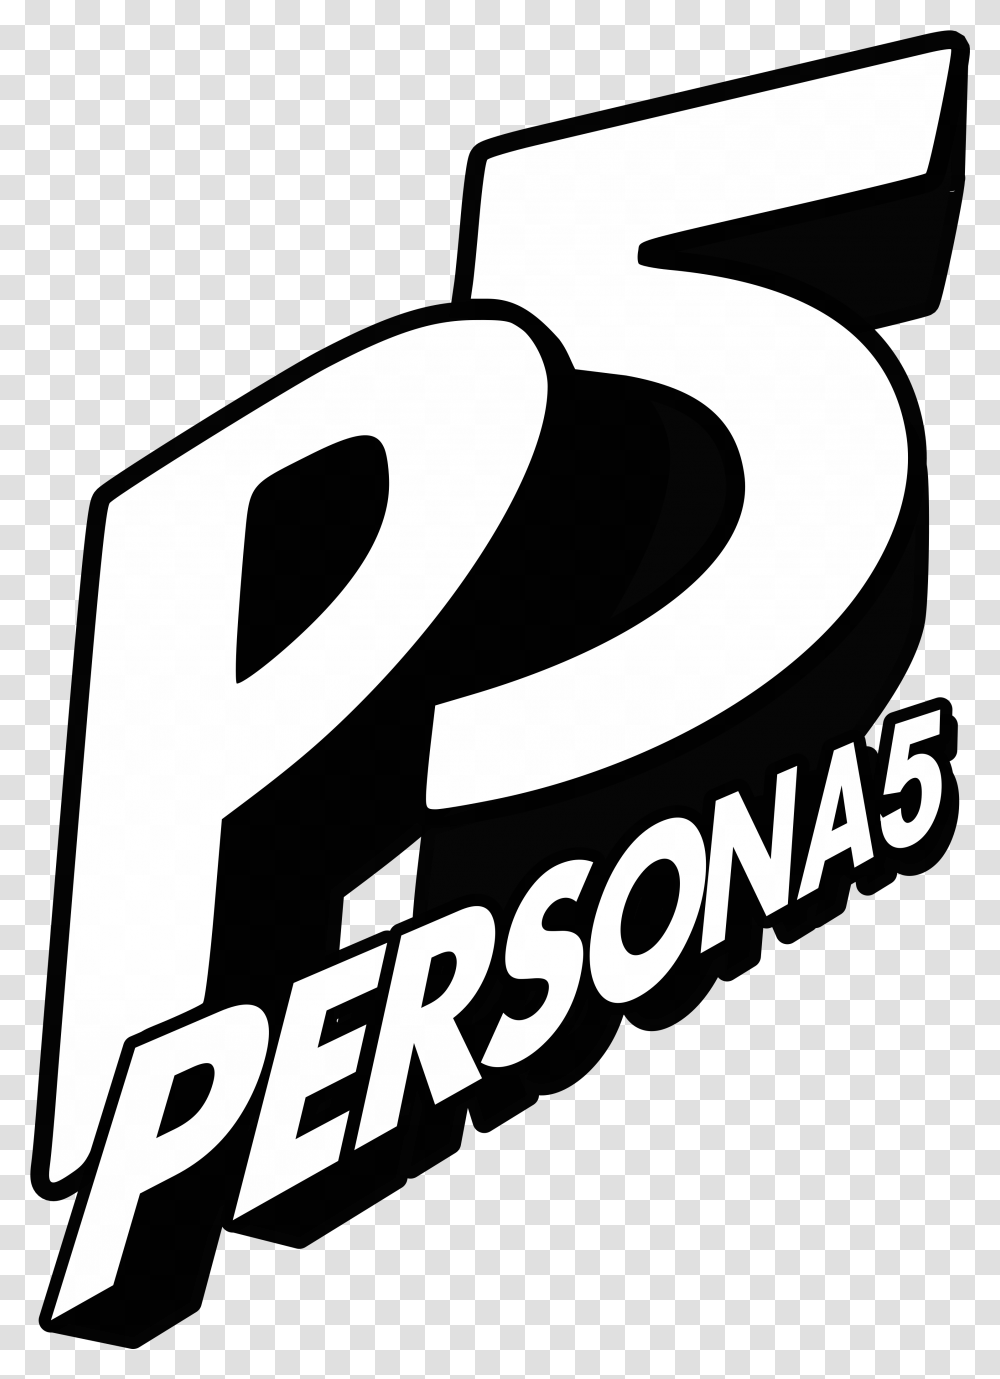 Persona 5 Logo In The Style Of P5s Persona 5 Logo, Text, Alphabet, Number, Symbol Transparent Png